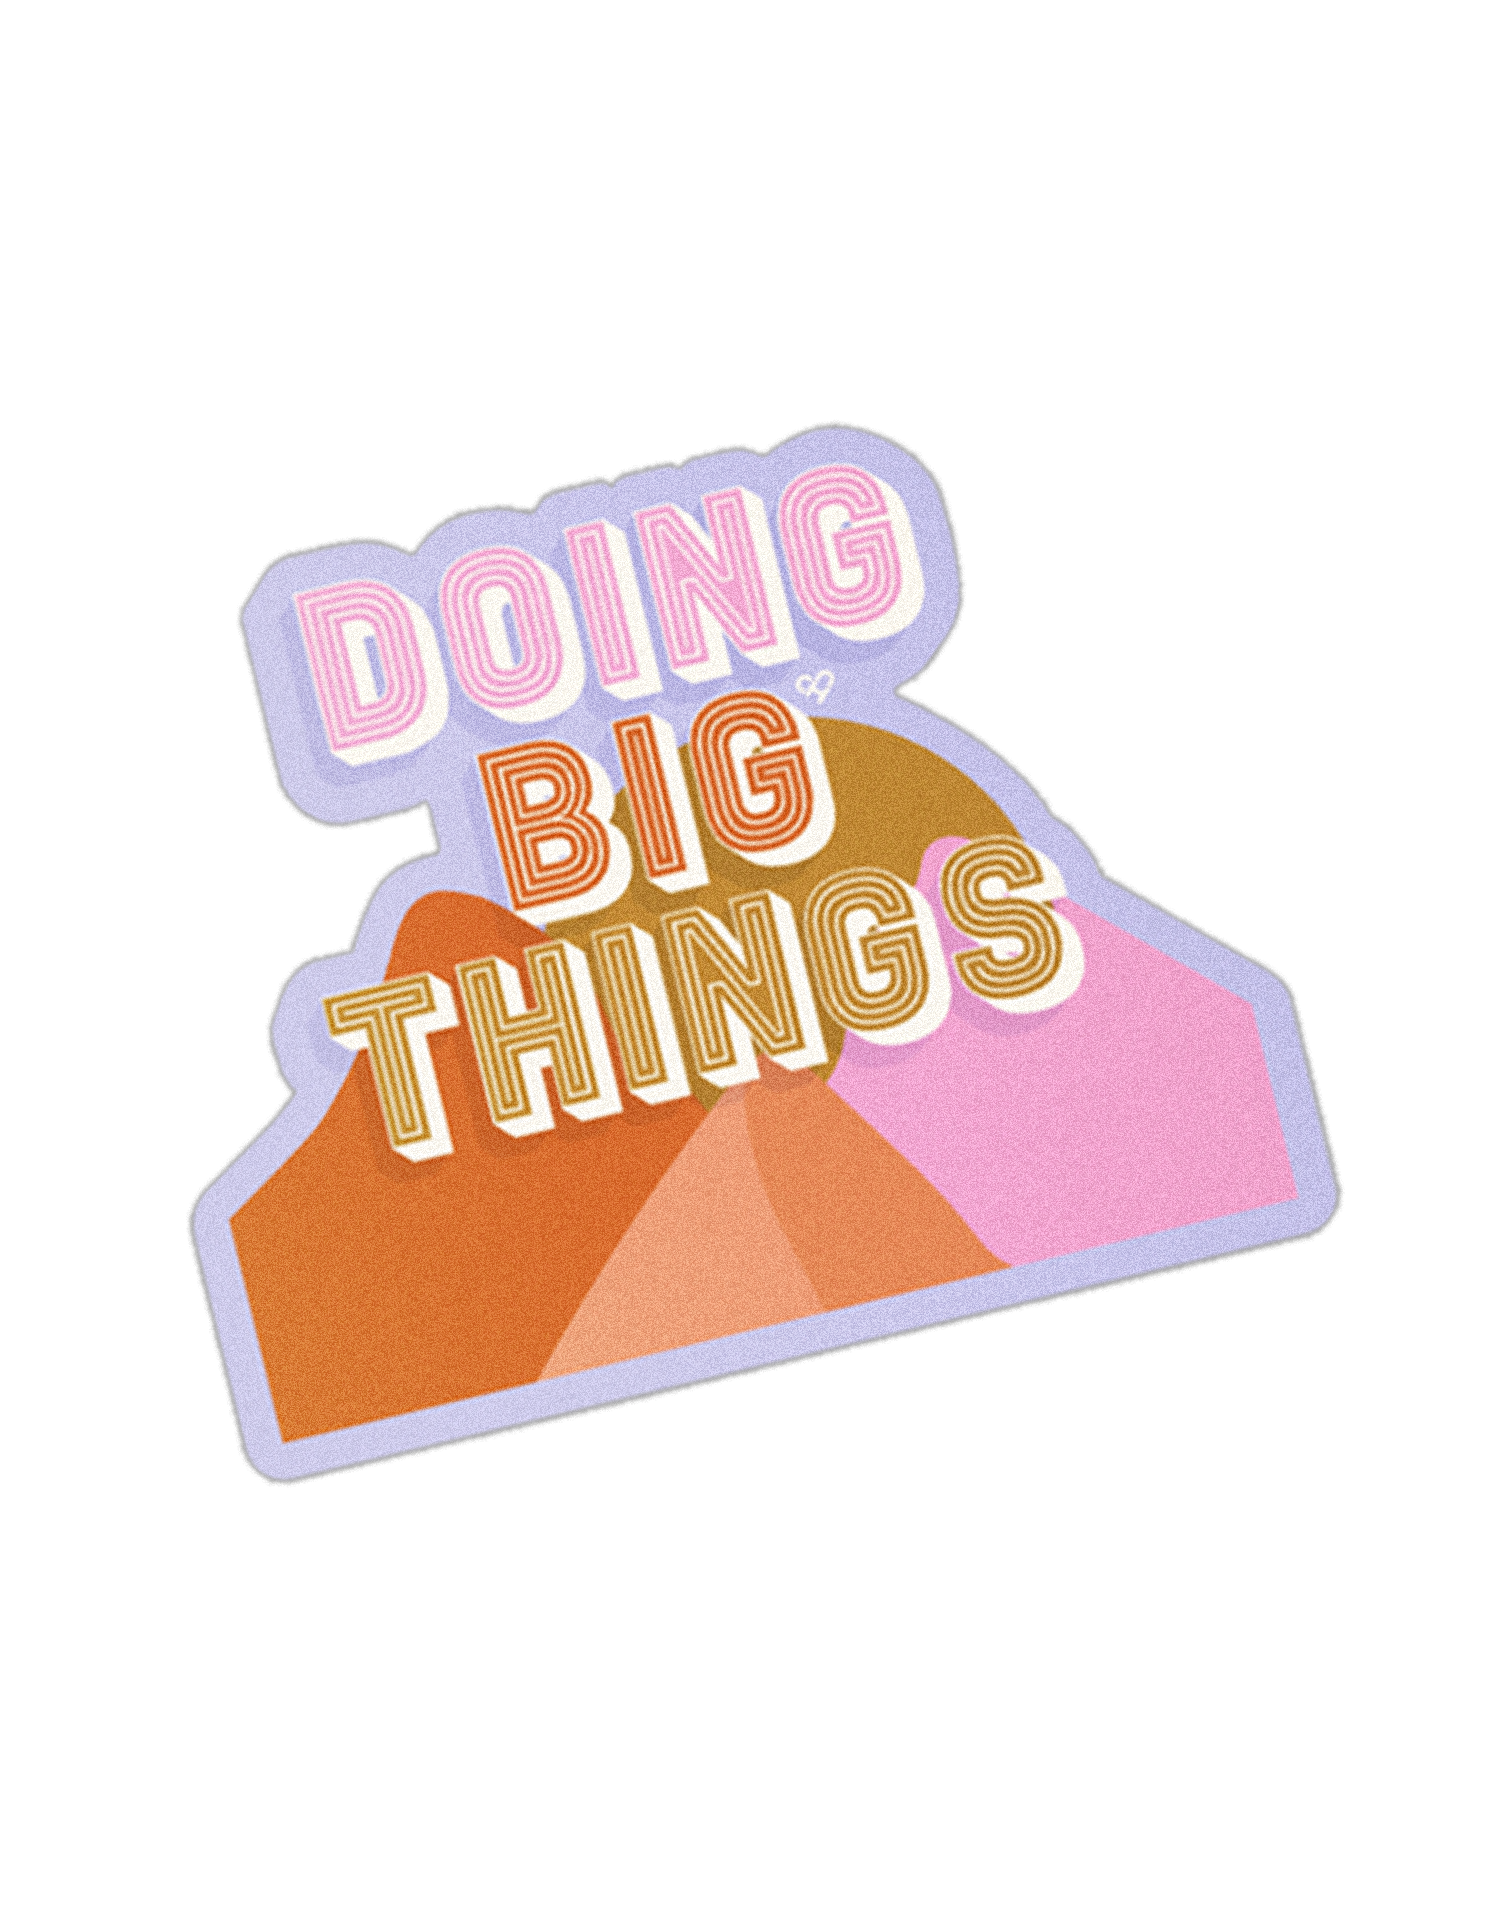 Doing-Big-Things.png